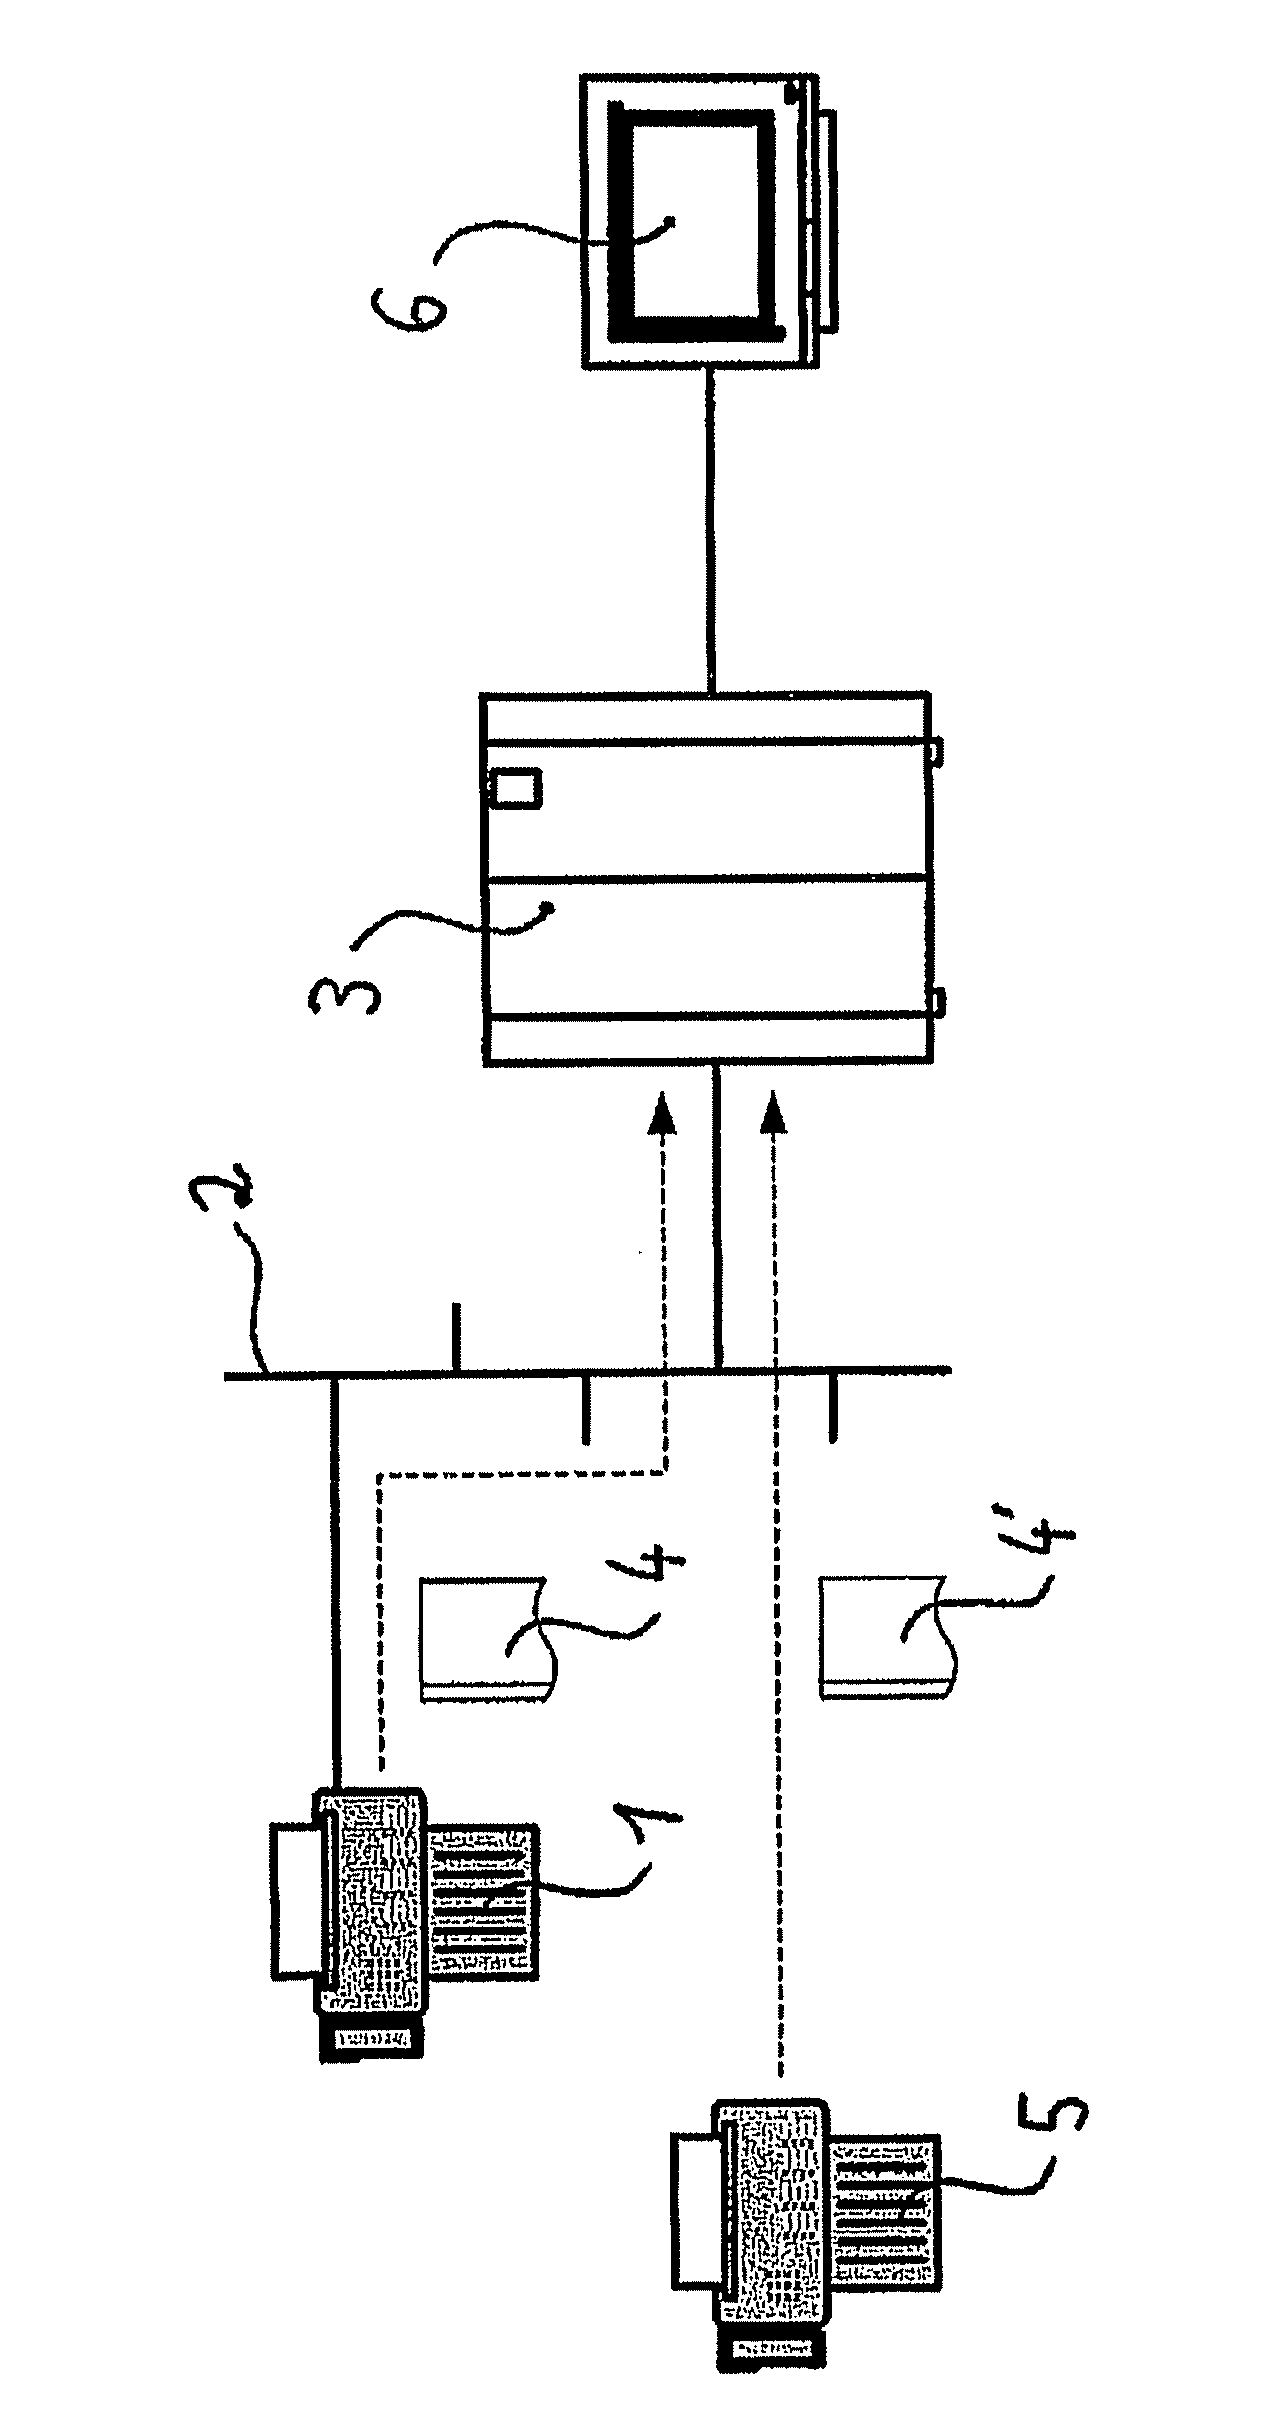 Method for replacement of a defective field device by a new field device in a system which communicates via a digital fieldbus, in particular an automation system